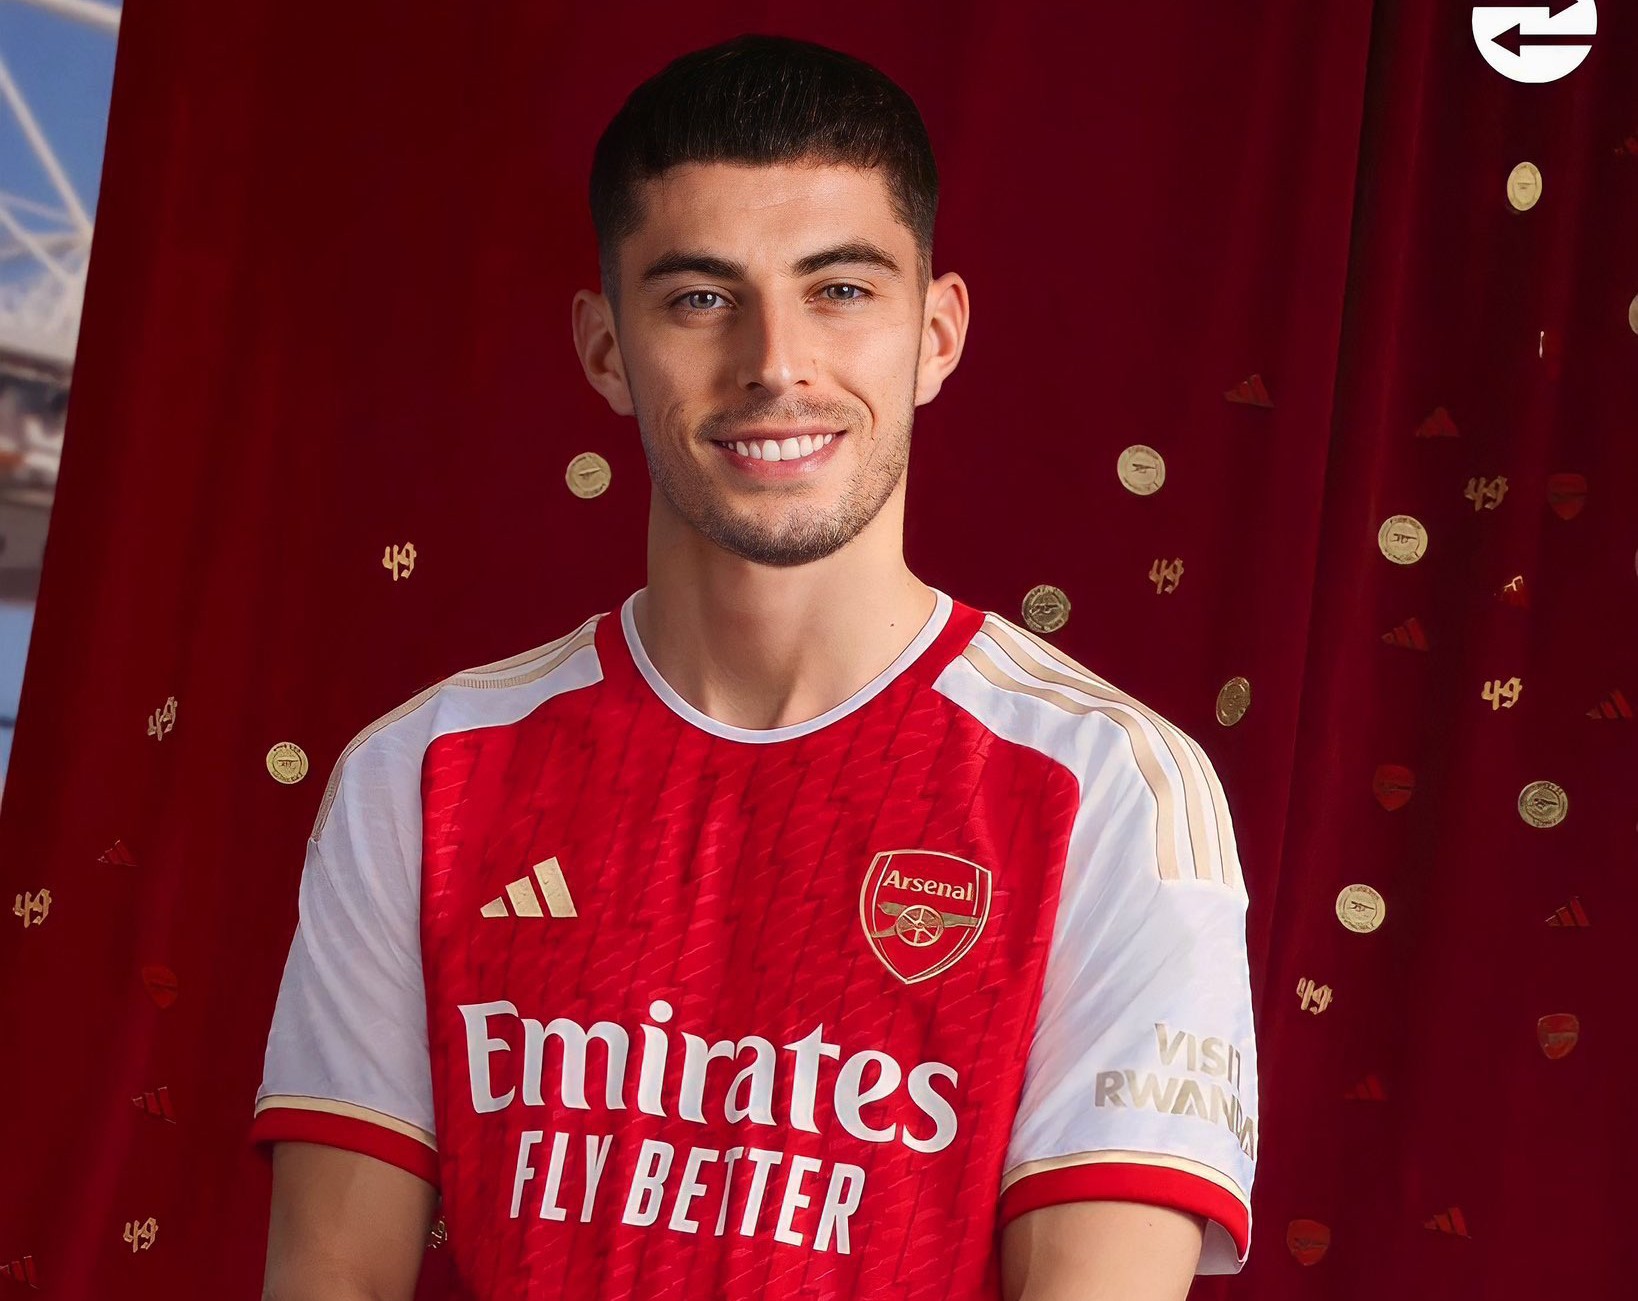  Kai Havertz, a German professional footballer who plays as a midfielder for Premier League club Arsenal and the Germany national team, poses in the club's new home kit for the 2023/24 season.